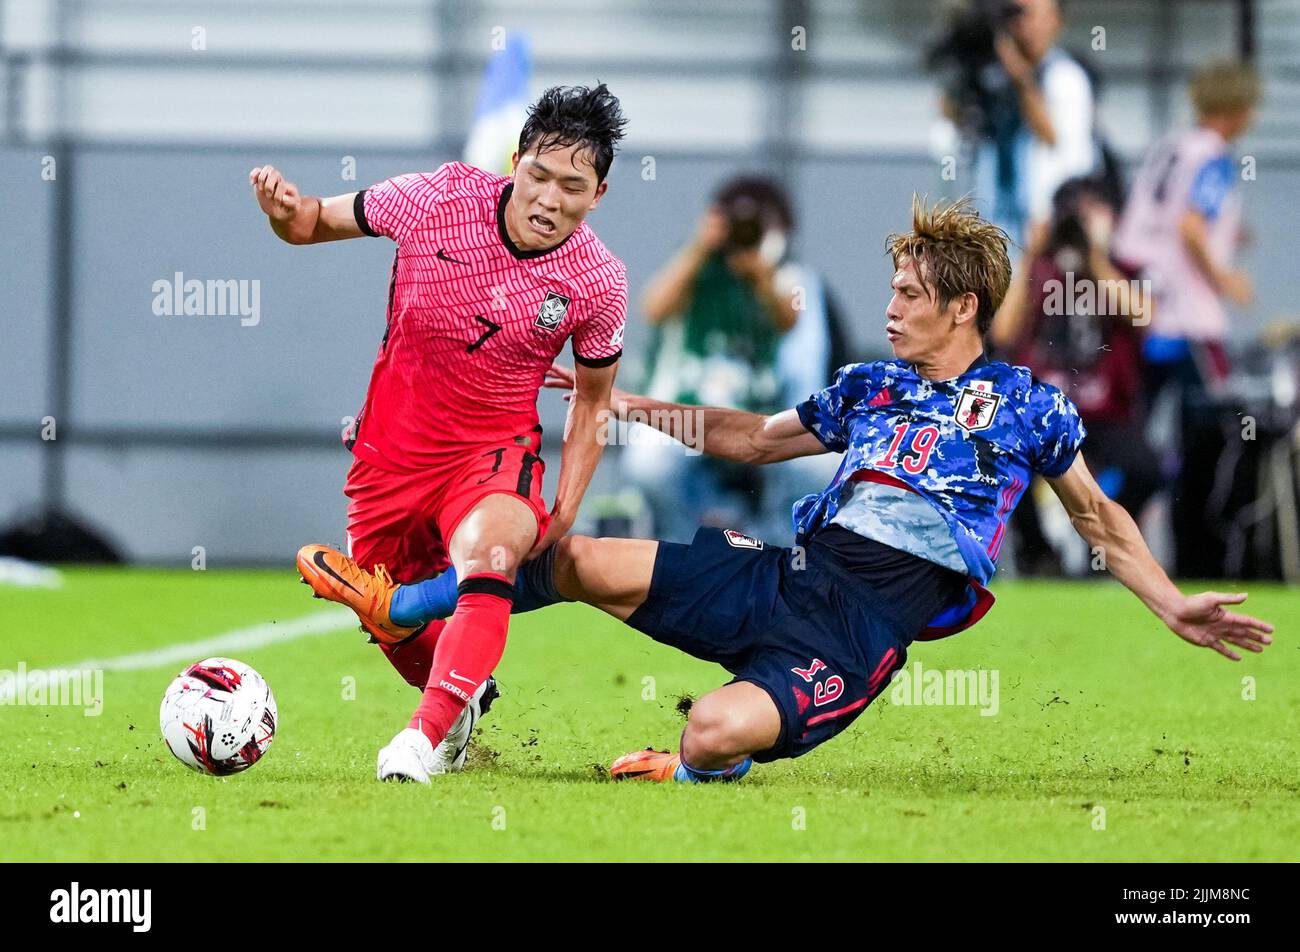 Toyota, Japan. 27th July, 2022. Sasaki Sho (R) of Japan vies with Na Sang Ho of South Korea during a 2022 EAFF (East Asian Football Federation) E-1 Football Championship men's match in Toyota, Japan, July 27, 2022. Credit: Zhang Xiaoyu/Xinhua/Alamy Live News Stock Photo